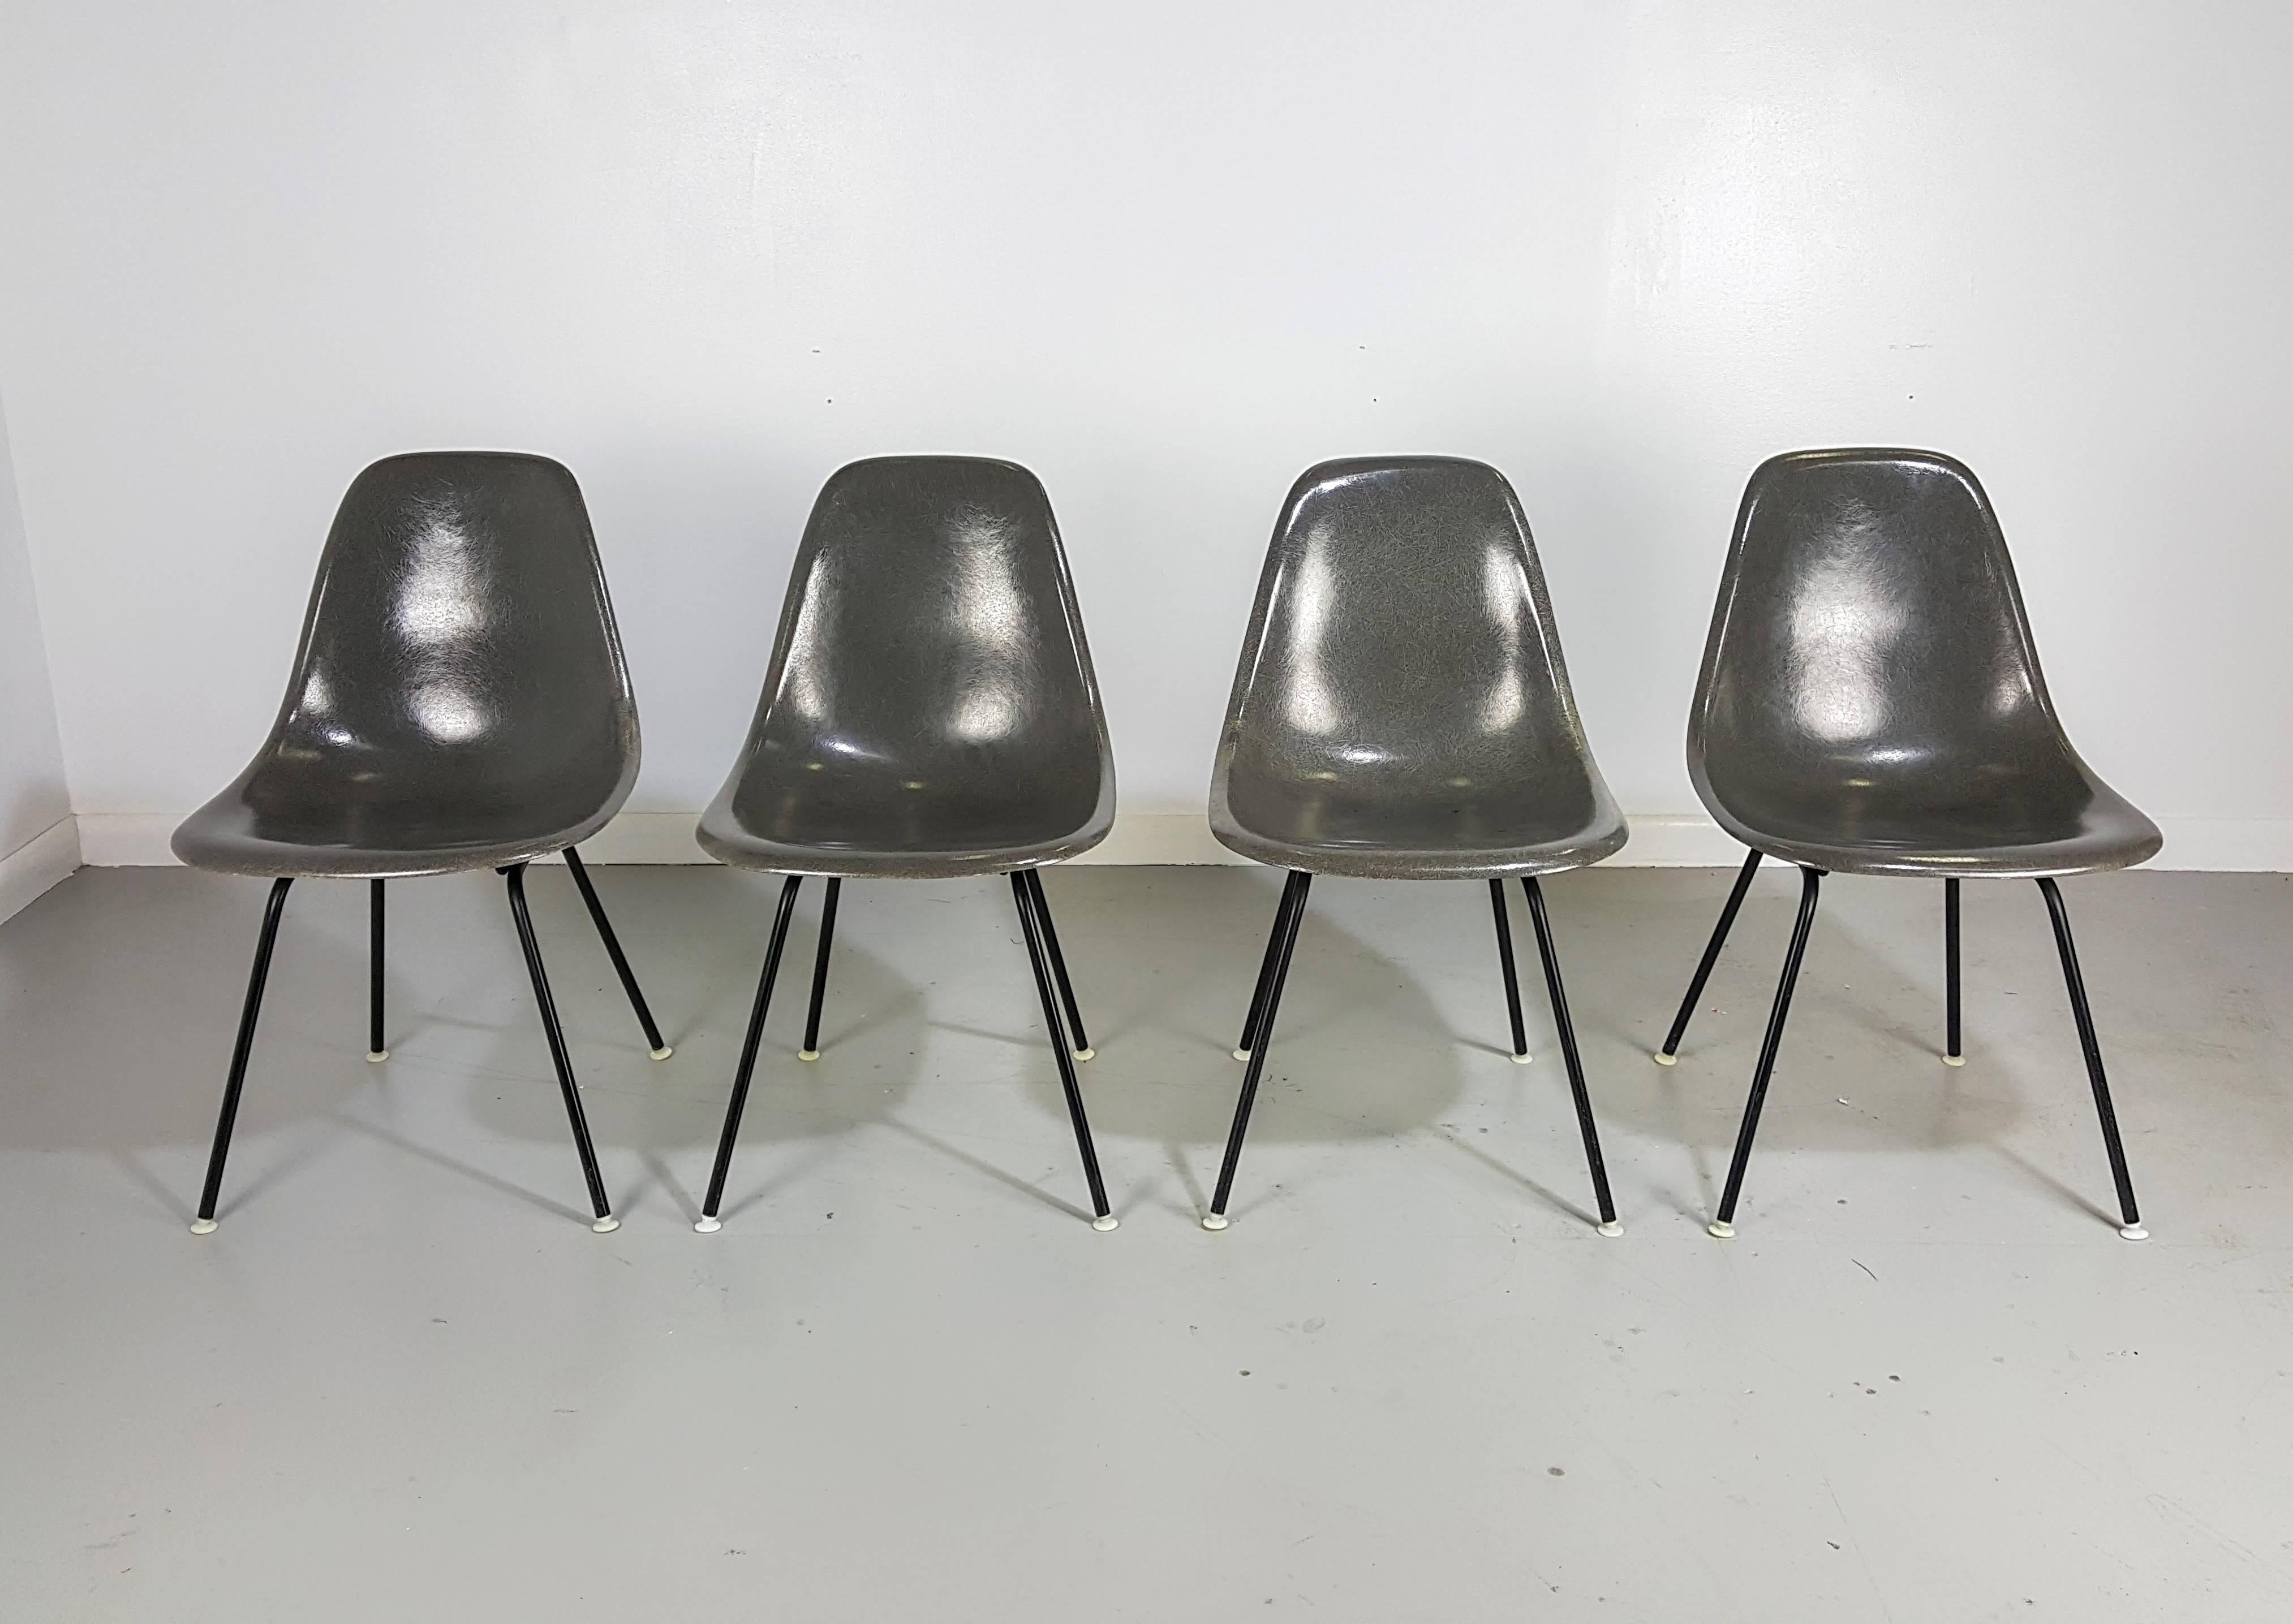 Four gray fiberglass shell chairs by Charles and Ray Eames, 1960s. Manufactured by Herman Miller. Excellent condition with original 